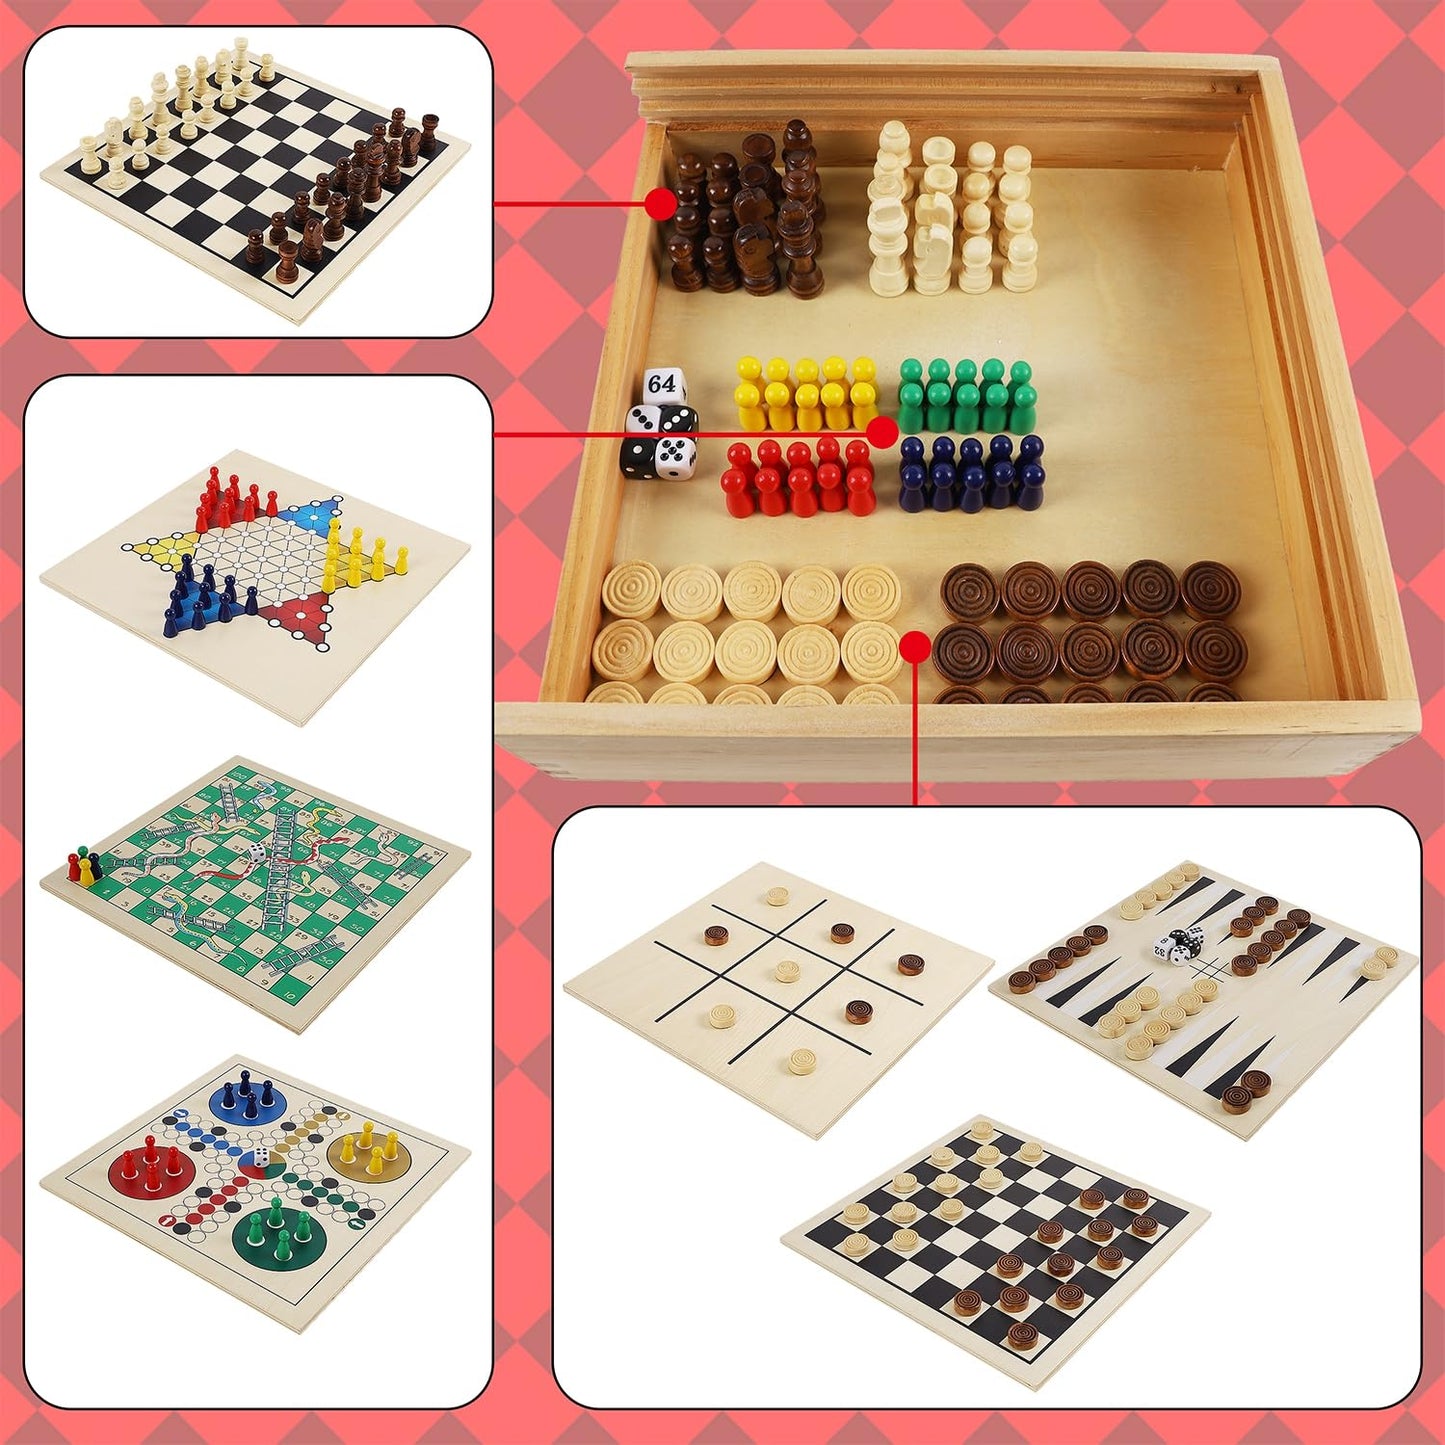 Juegoal 7-in-1 Wooden Board Game Set for Kids Adults, Tabletop Combo Classic Travel Portable Board Games (Chess, Checkers, Chinese Checkers, Backgammon, Parcheesi, Snakes and Ladders, Tic Tac Toe)